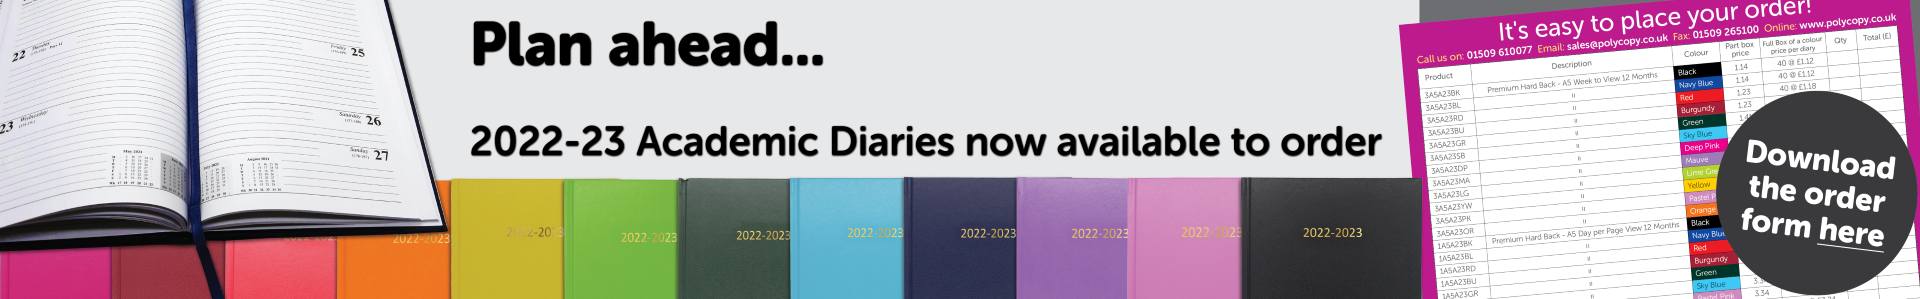 Academic Diaries 2022-23 now available to order